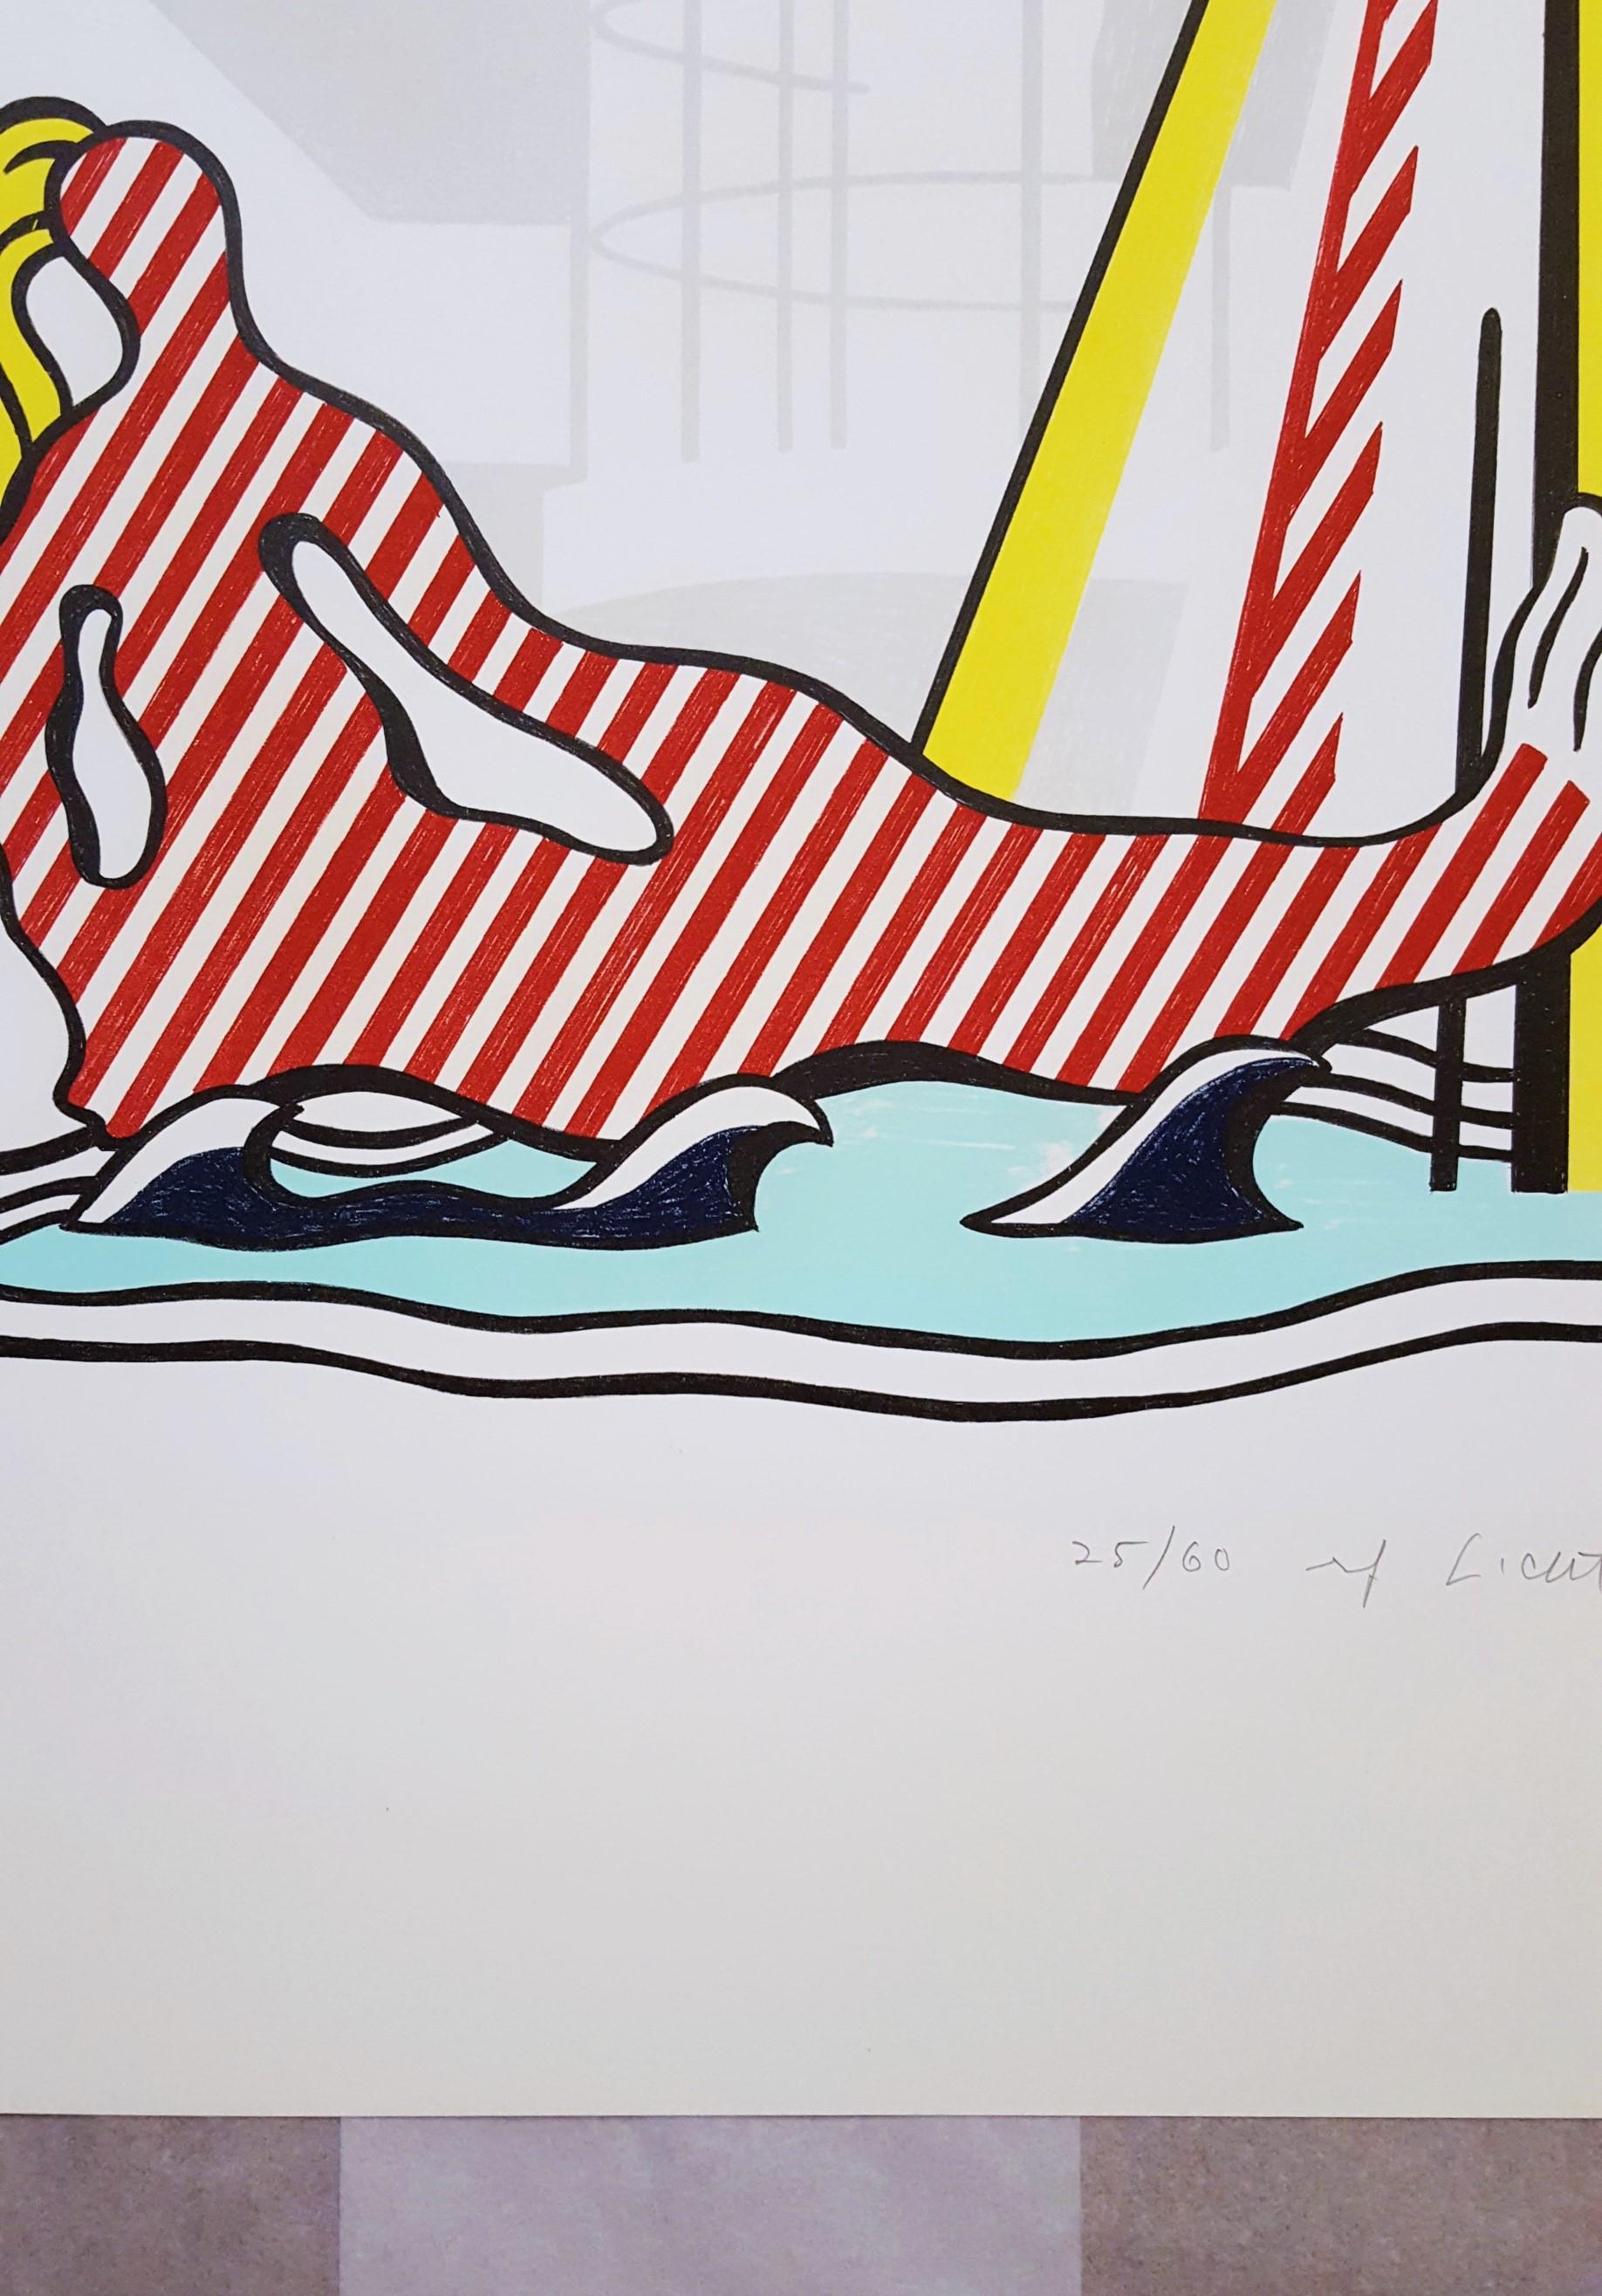 An original signed lithograph on Arches 88 paper by American artist Roy Lichtenstein (1923-1997) titled 